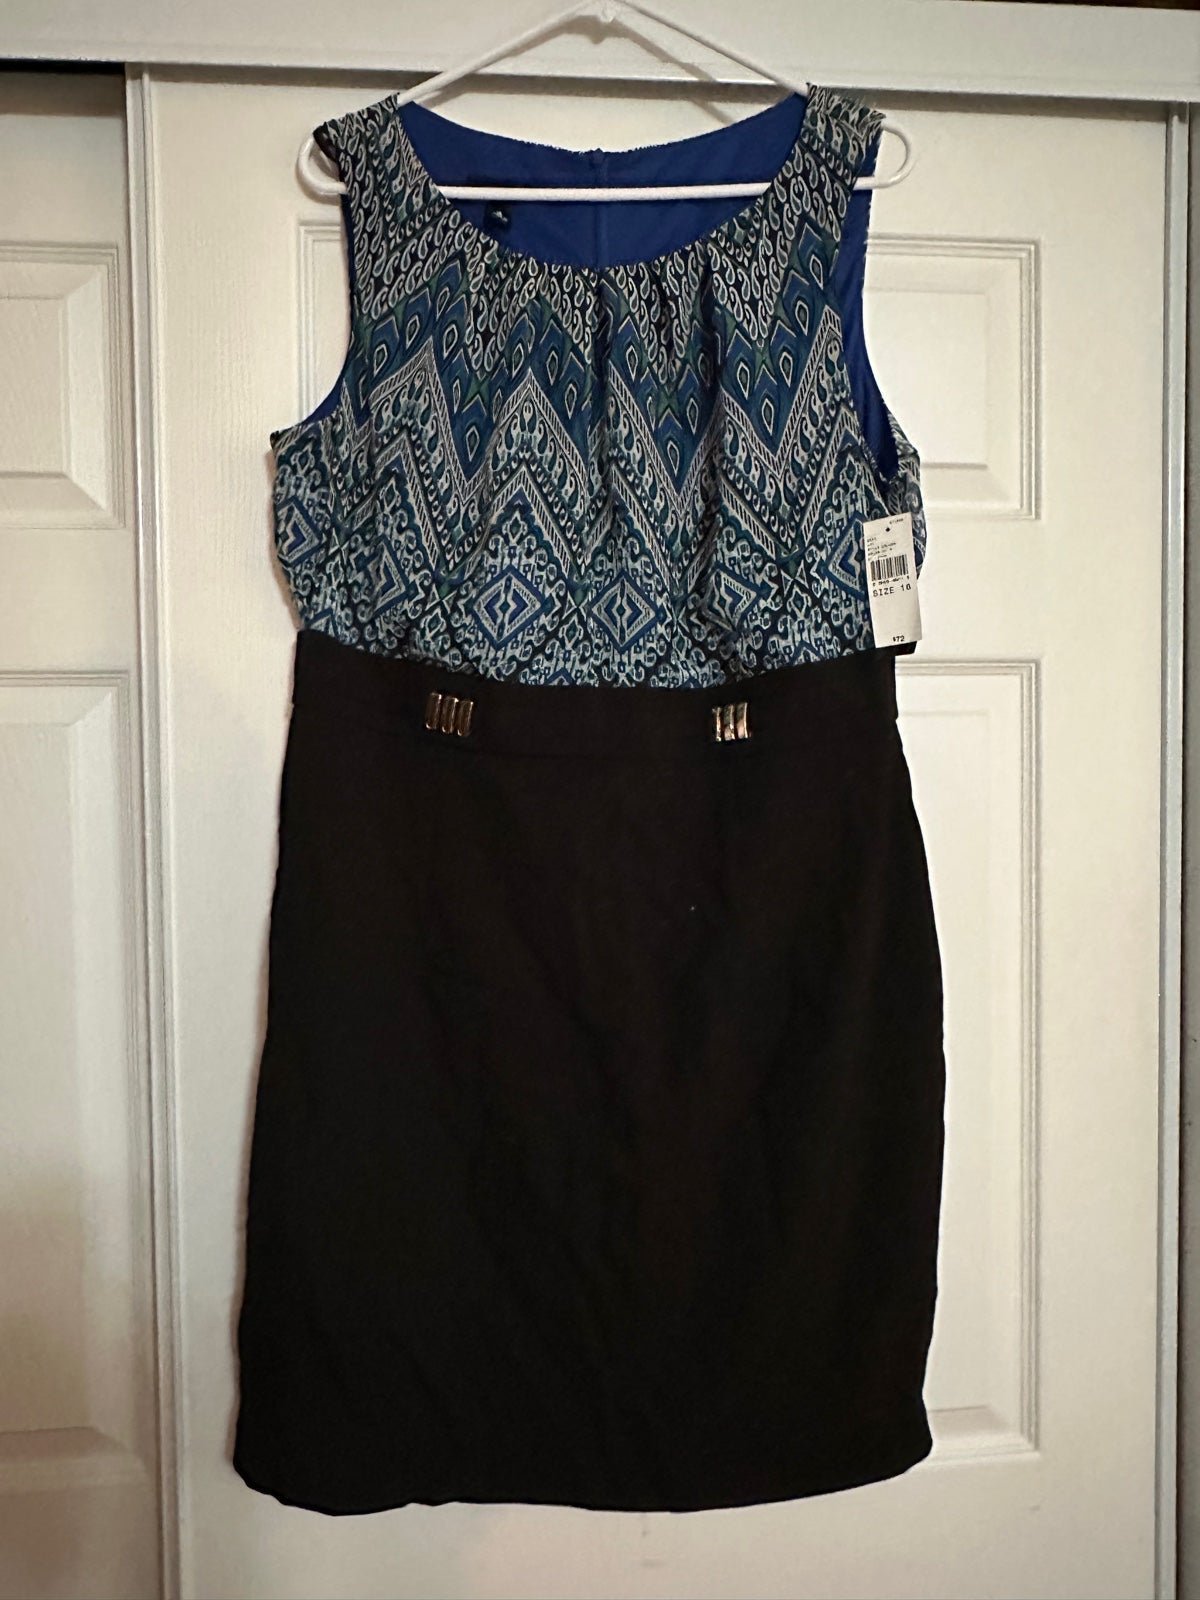 Affordable Womens dress size 16 new with tags o6Omsrik3